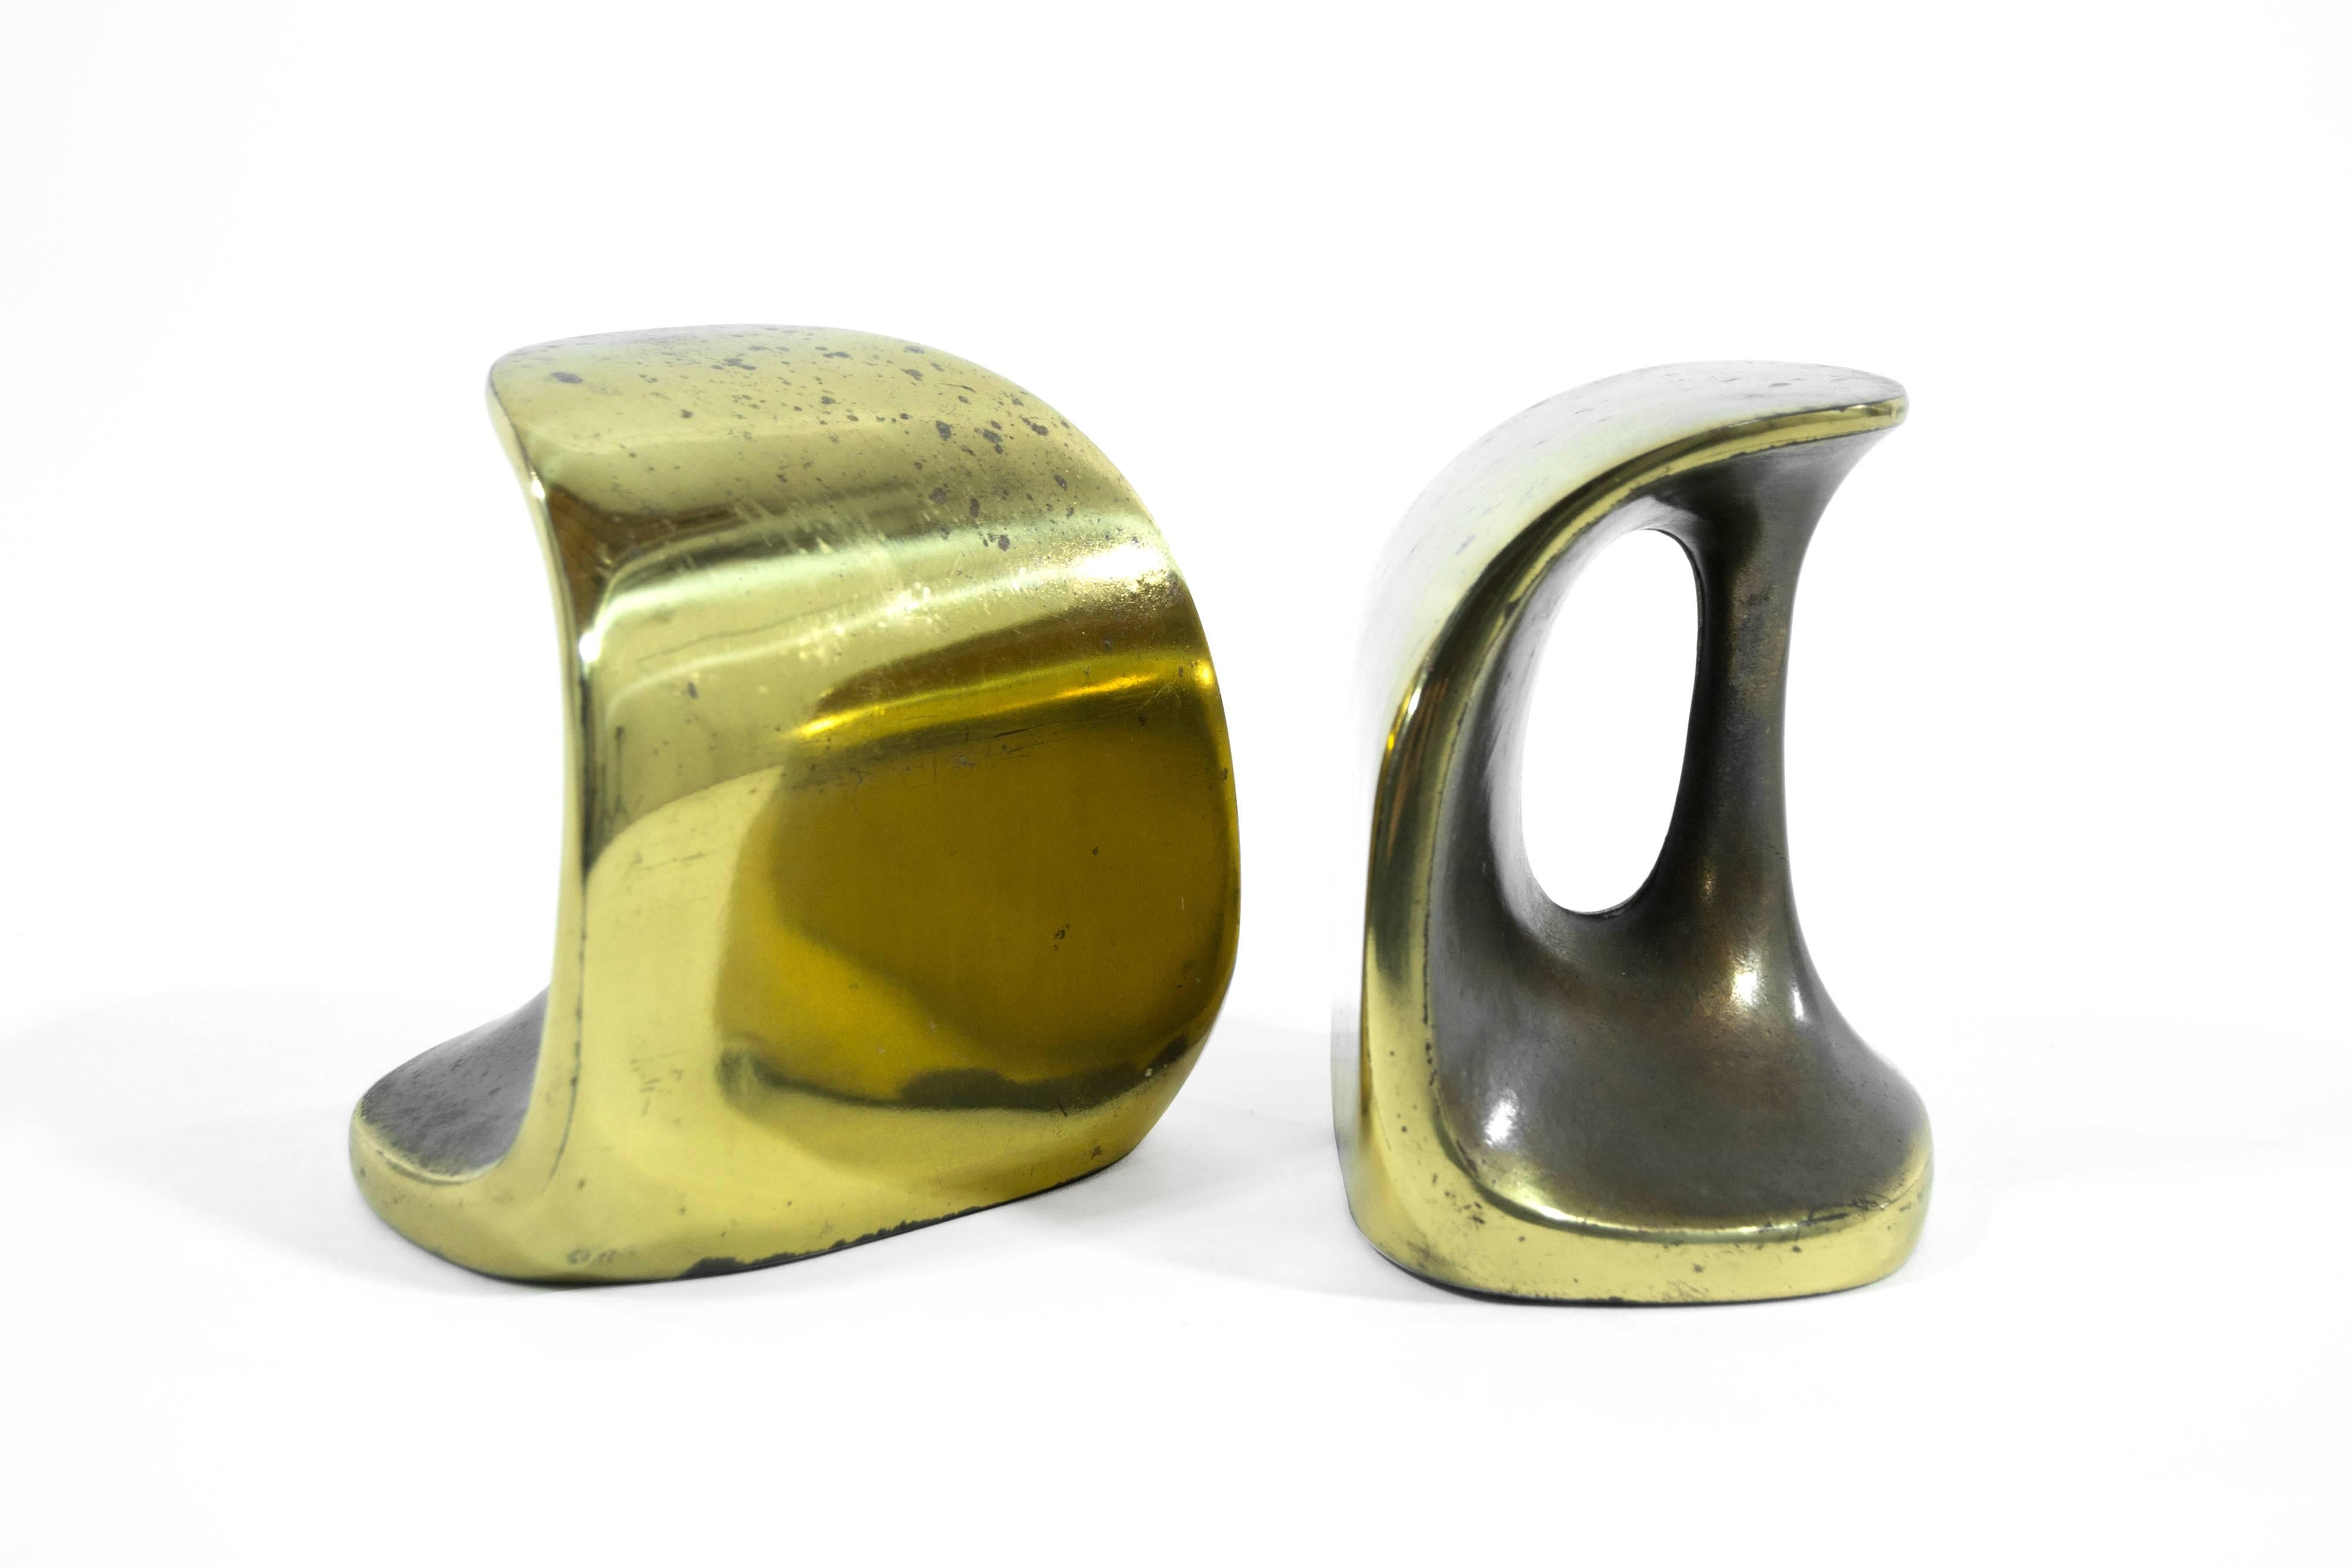 Pair of sculptural cast brass bookends with handles by Ben Seibel for Jenfred Ware and distributed by Raymor. They retain their original felt bottoms and label.